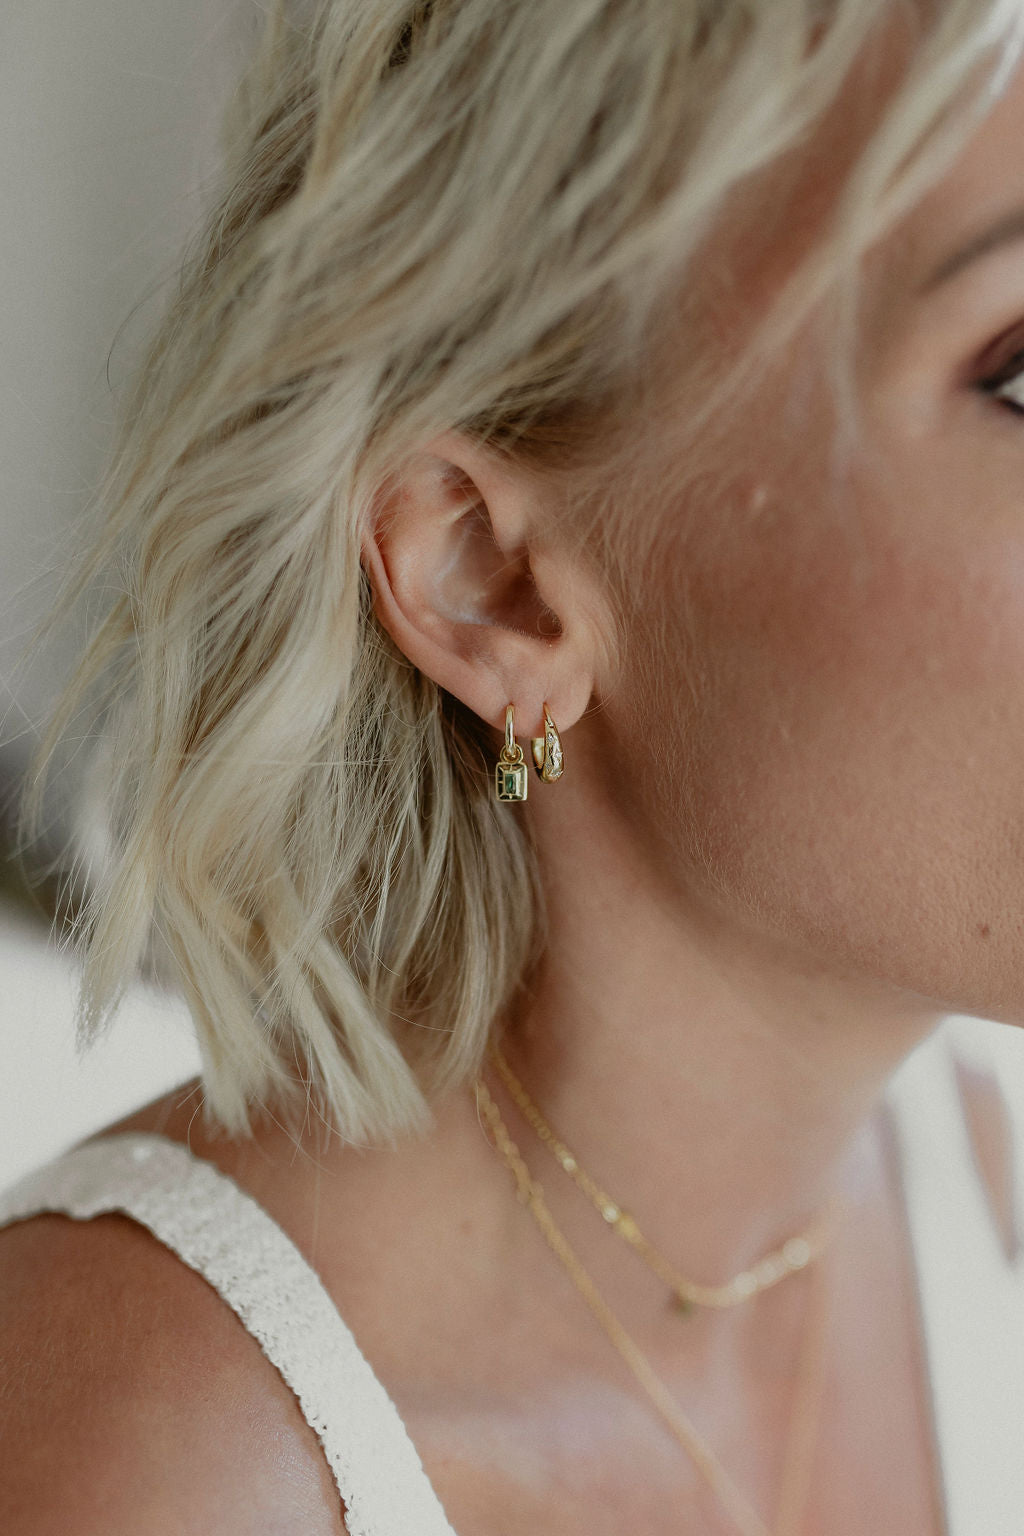 Stars Earrings and Gem Hoops when worn, Gold, Emerald Laced with Kindness, Accessories, Beautiful Chaos Collection